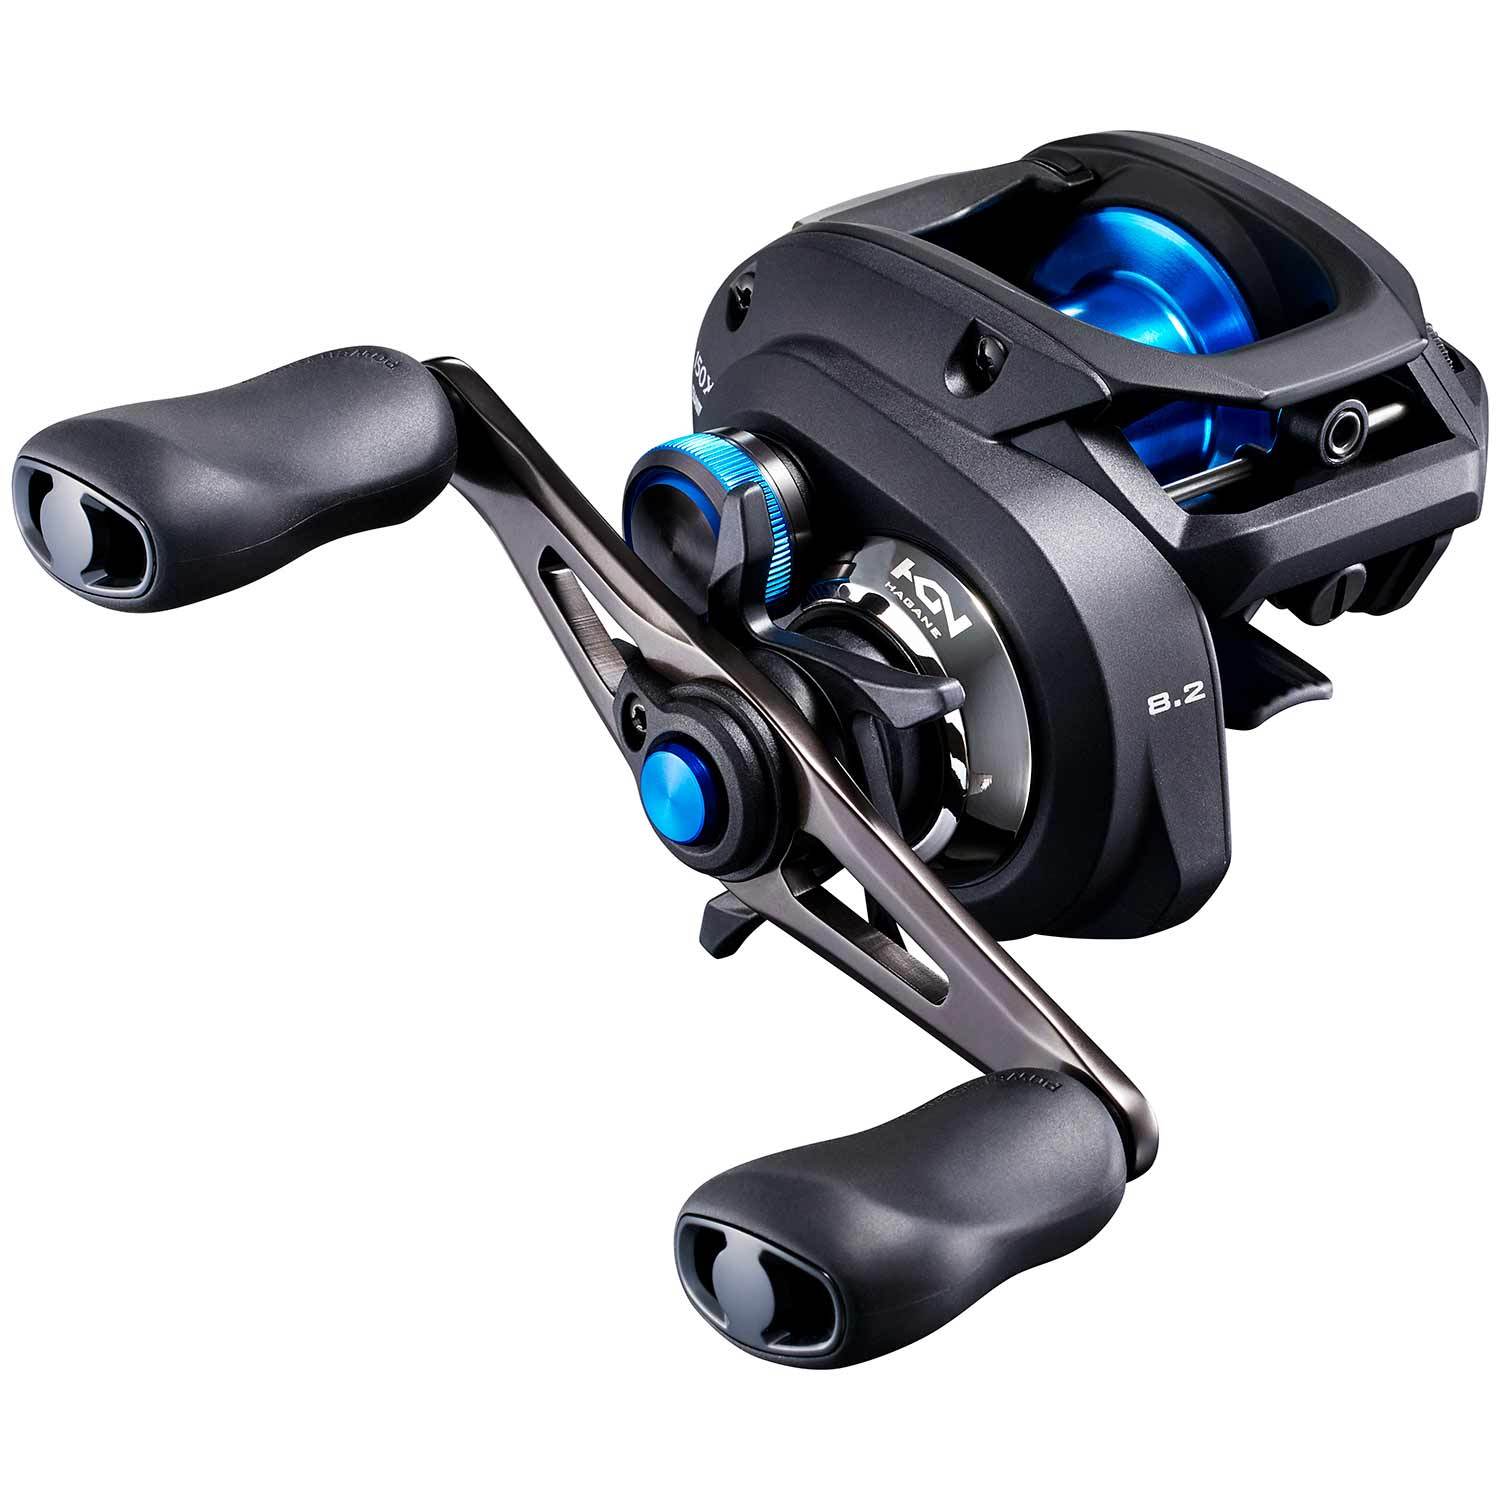 Lure Bait Caster Baitcasting Trolling Fishing Reel Wheel Display Stand  Holder Support Rack Storage Collecting Store Up